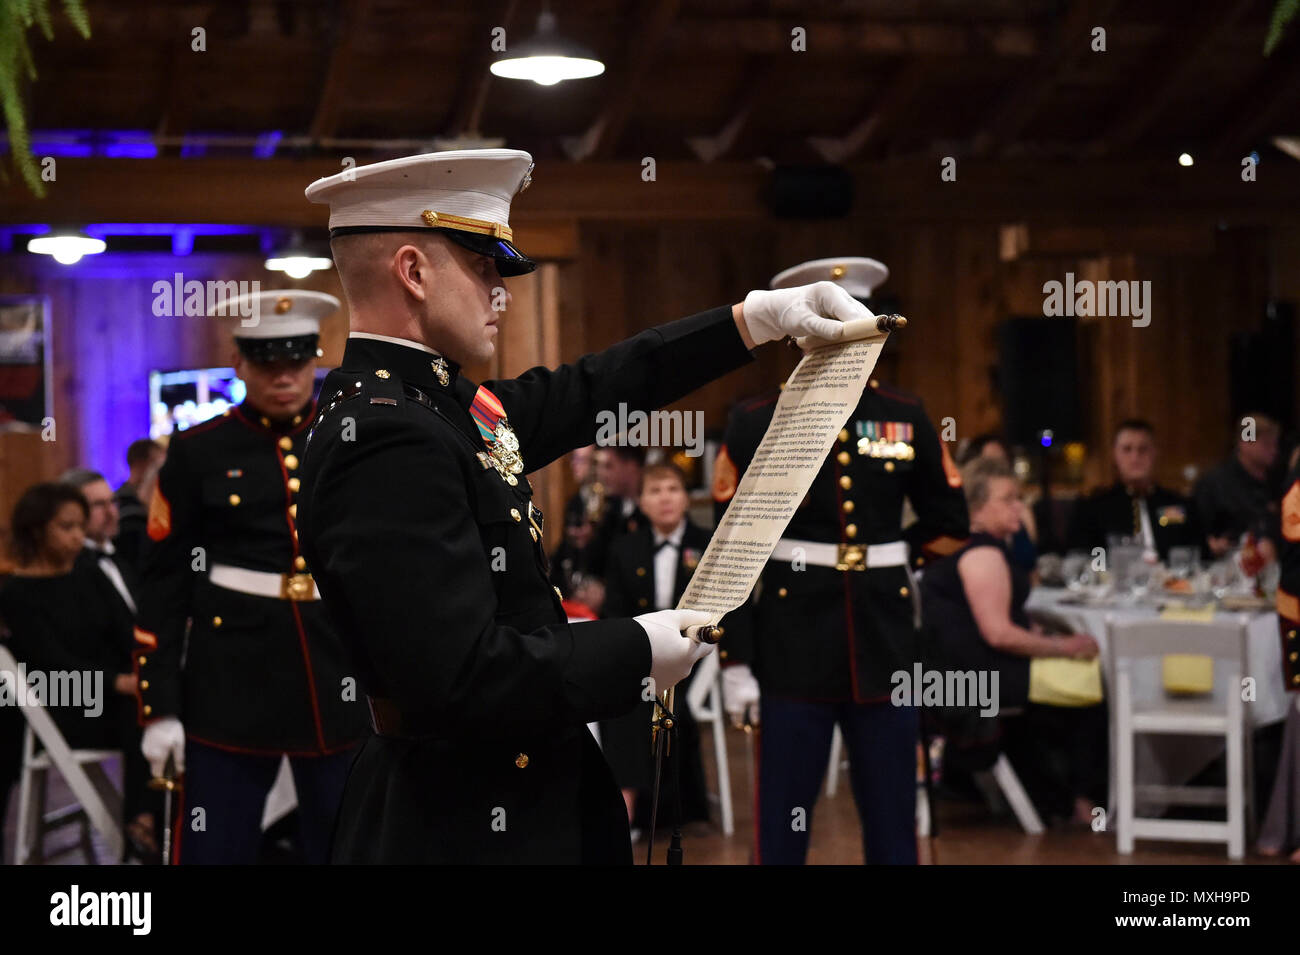 161104-N-OO032-126 POULSBO, Wash. (Nov. 4, 2016) Marine Corps 1st Lt. Derik Henderson, Marine Corps Security Force Battalion-Bangor adjutant, finishes reading Maj. Gen. John Lejeune's General Order 47 during the 241st United States Marine Corps birthday ball hosted by the battalion at the Kiana Lodge. Maj. Gen. John Lejeune issued General Order 47 on November 1, 1921, for Marines to commemorate the establishment of the Continental Marines — November 10, 1775. (U.S. Navy photo by Petty Officer 1st Class Cory Asato/Released) Stock Photo